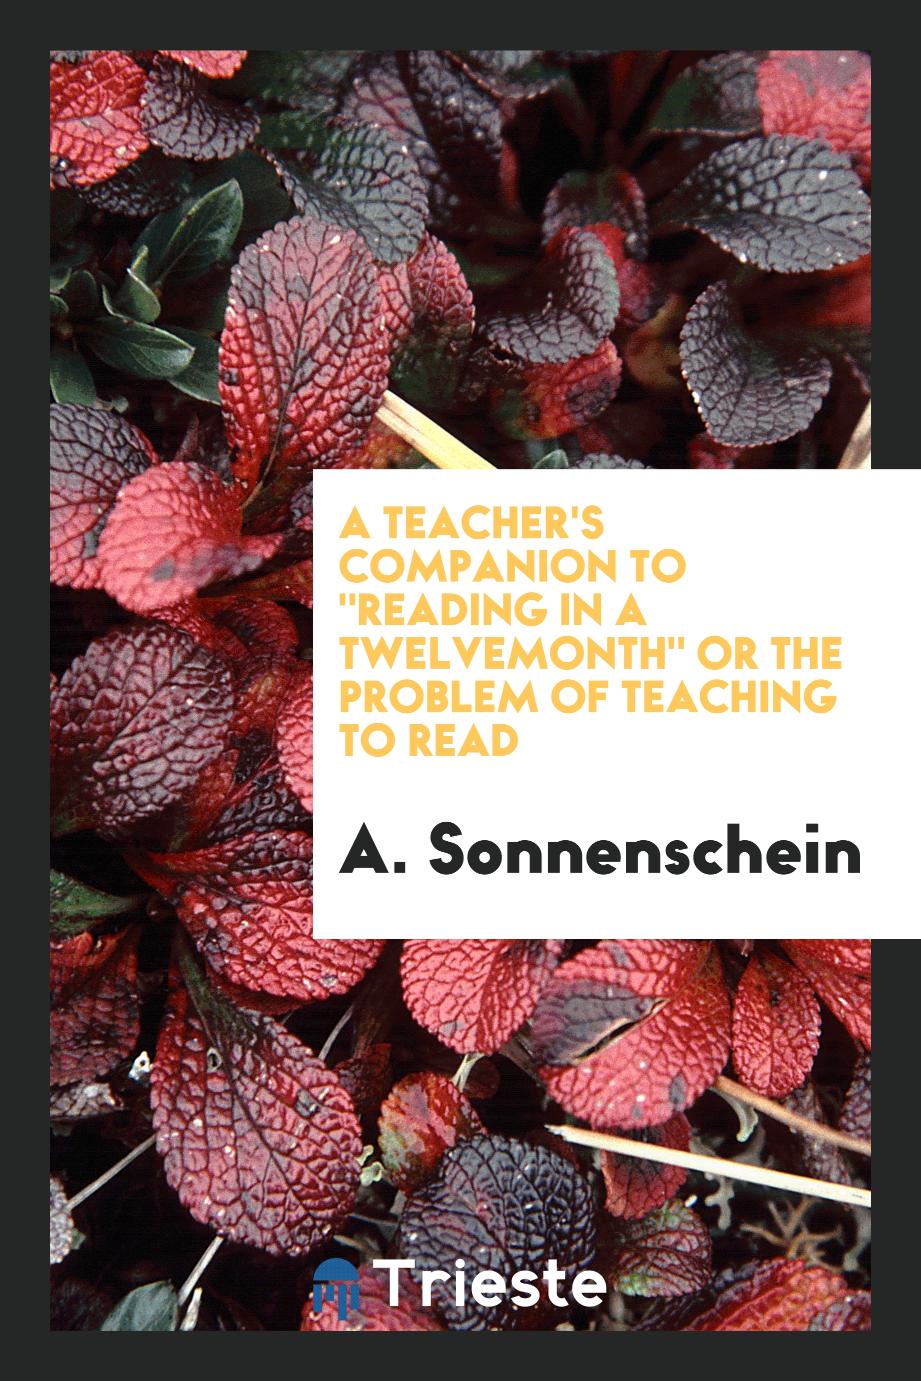 A Teacher's Companion to "Reading in a Twelvemonth" Or the Problem of Teaching to Read